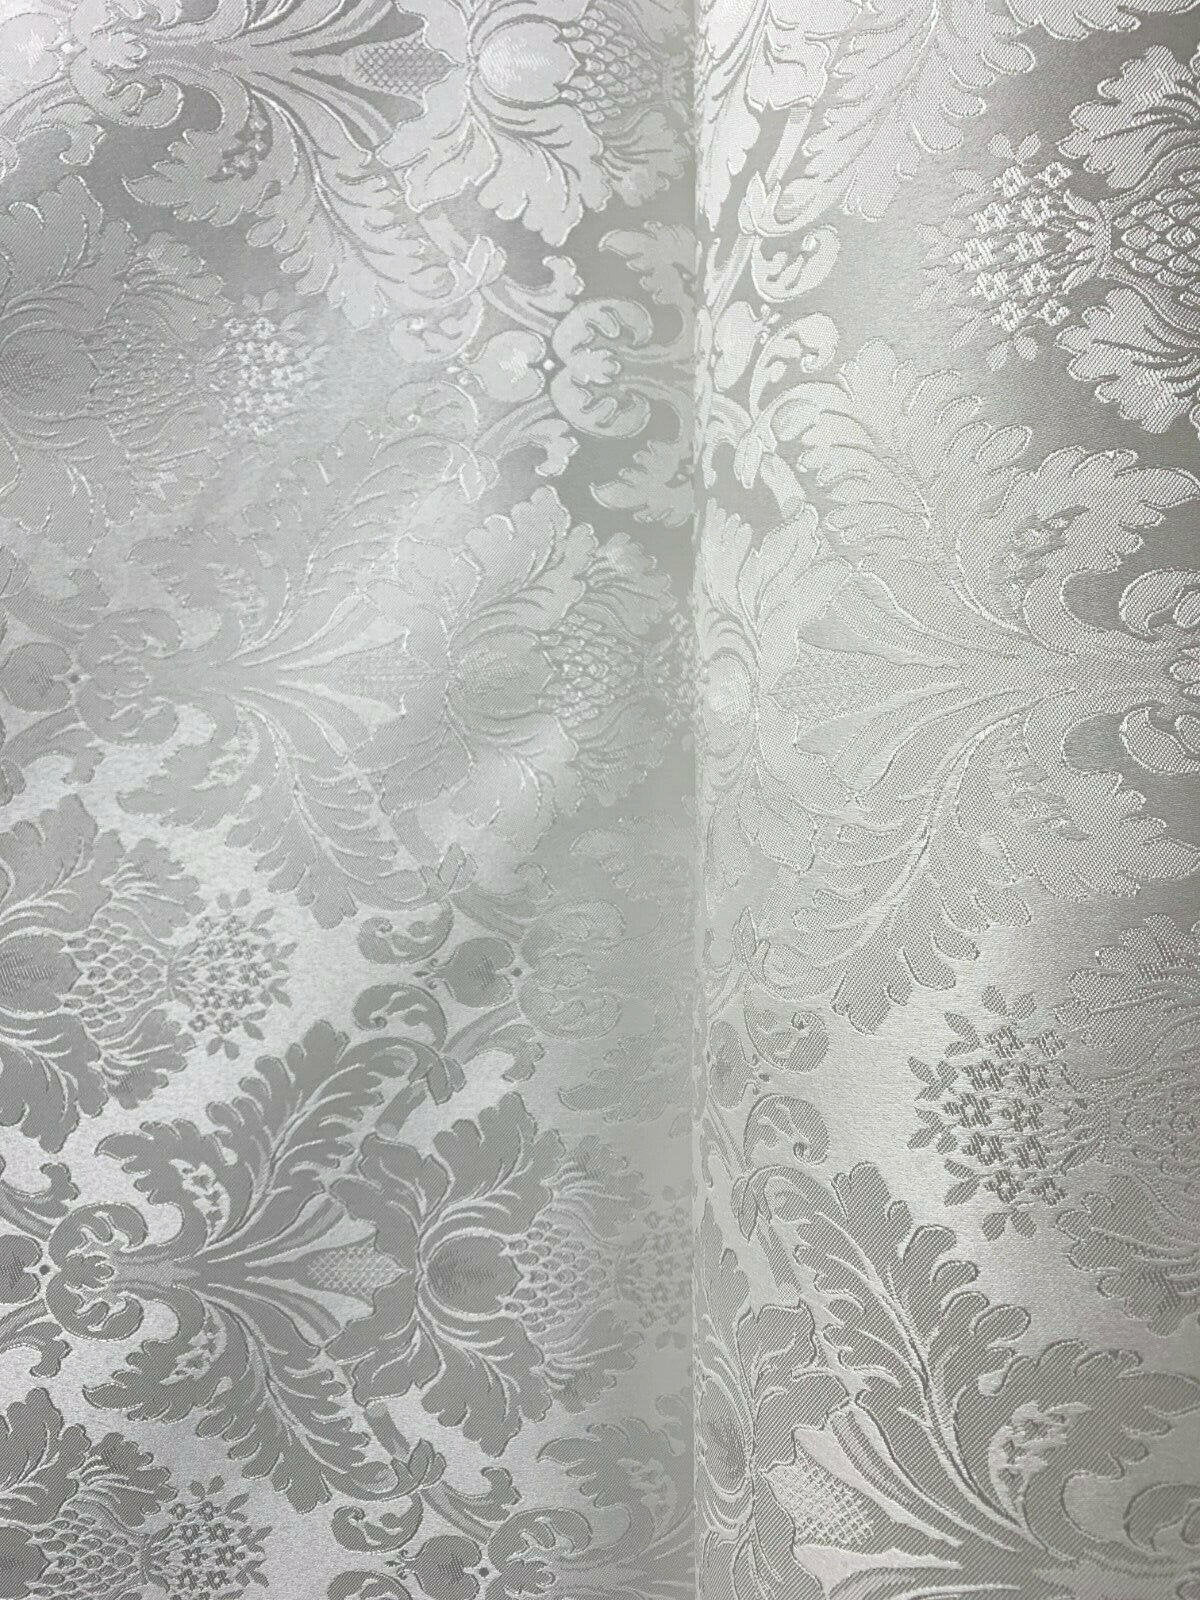 WHITE Damask Jacquard Brocade Flower Floral Fabric (110 in.) Sold By The Yard